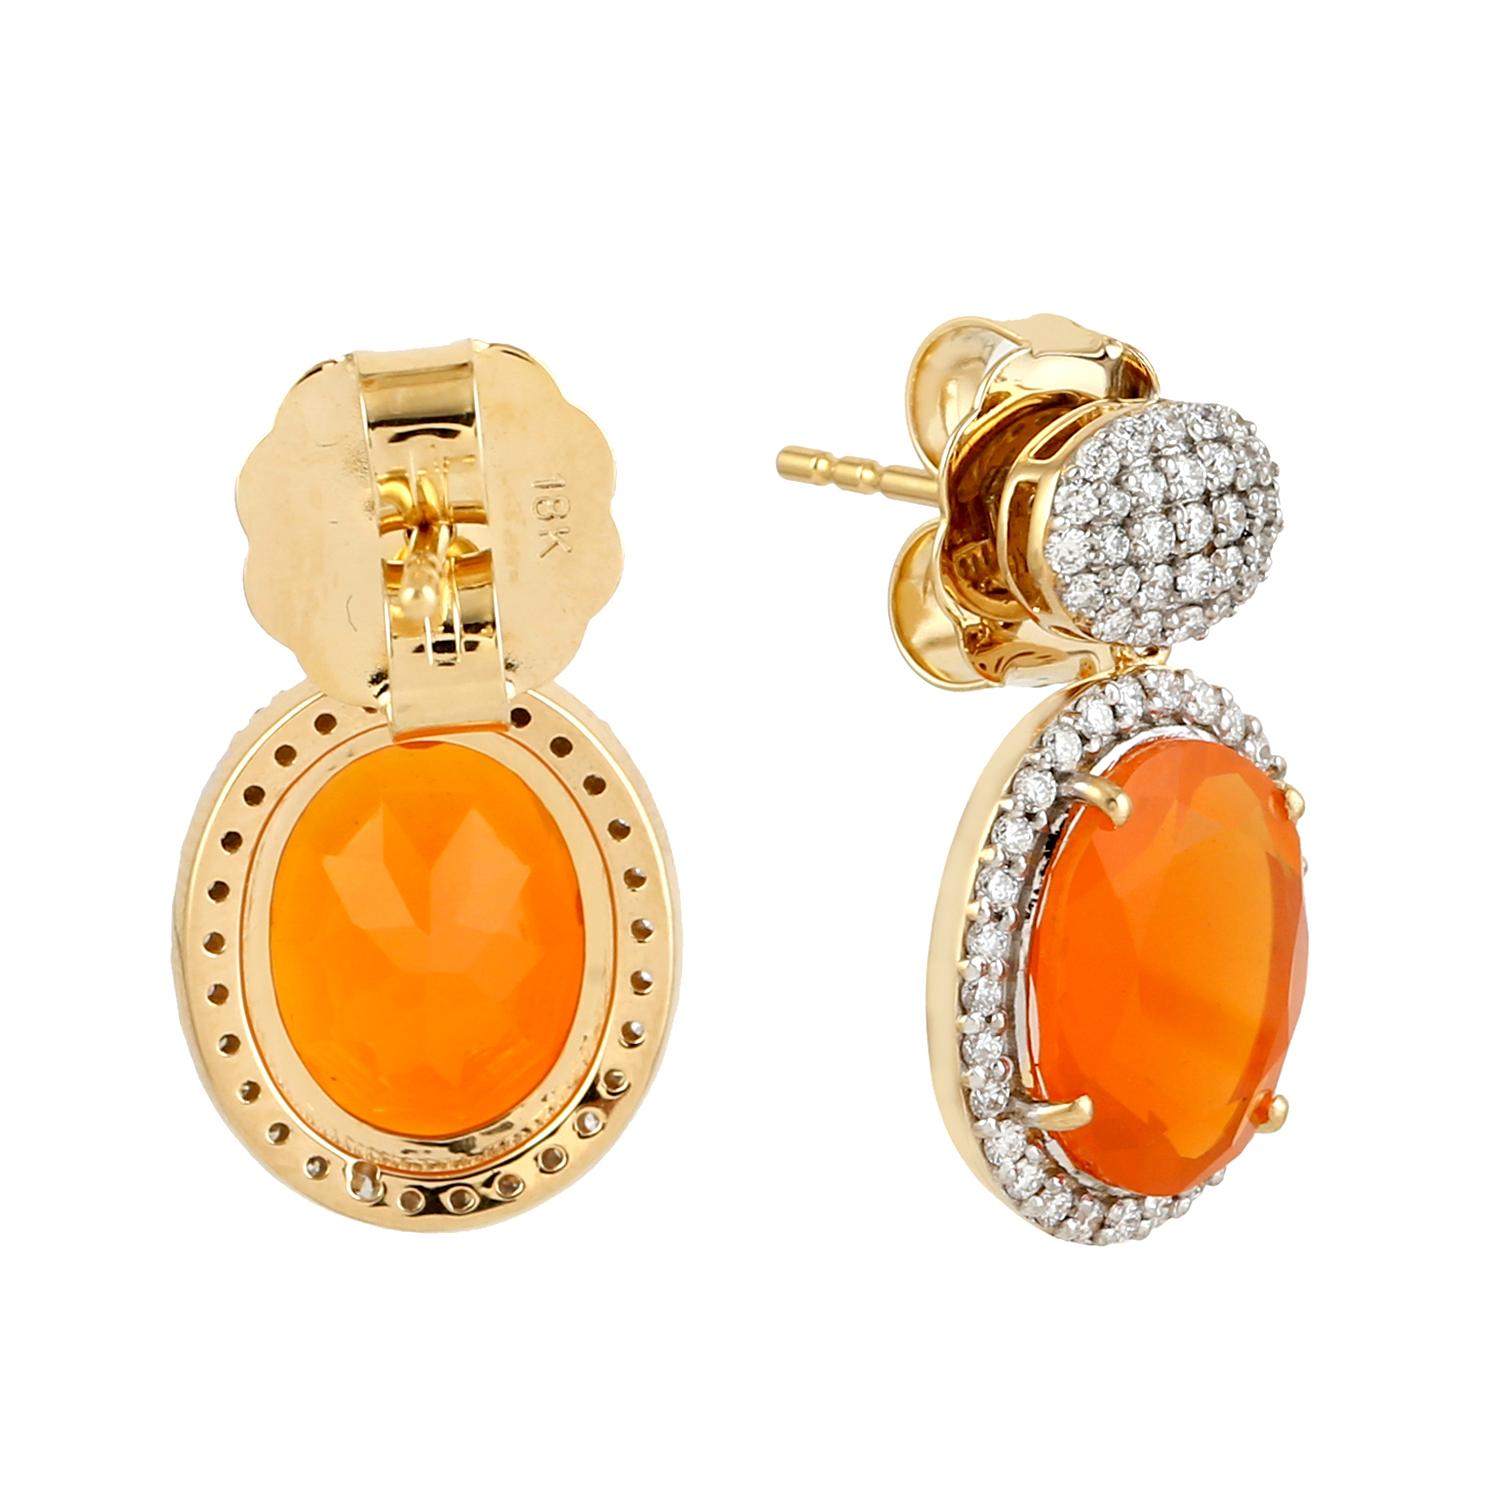 Art Deco Oval Shaped Vivid Fire Opal With Diamonds In 18k Yellow Gold